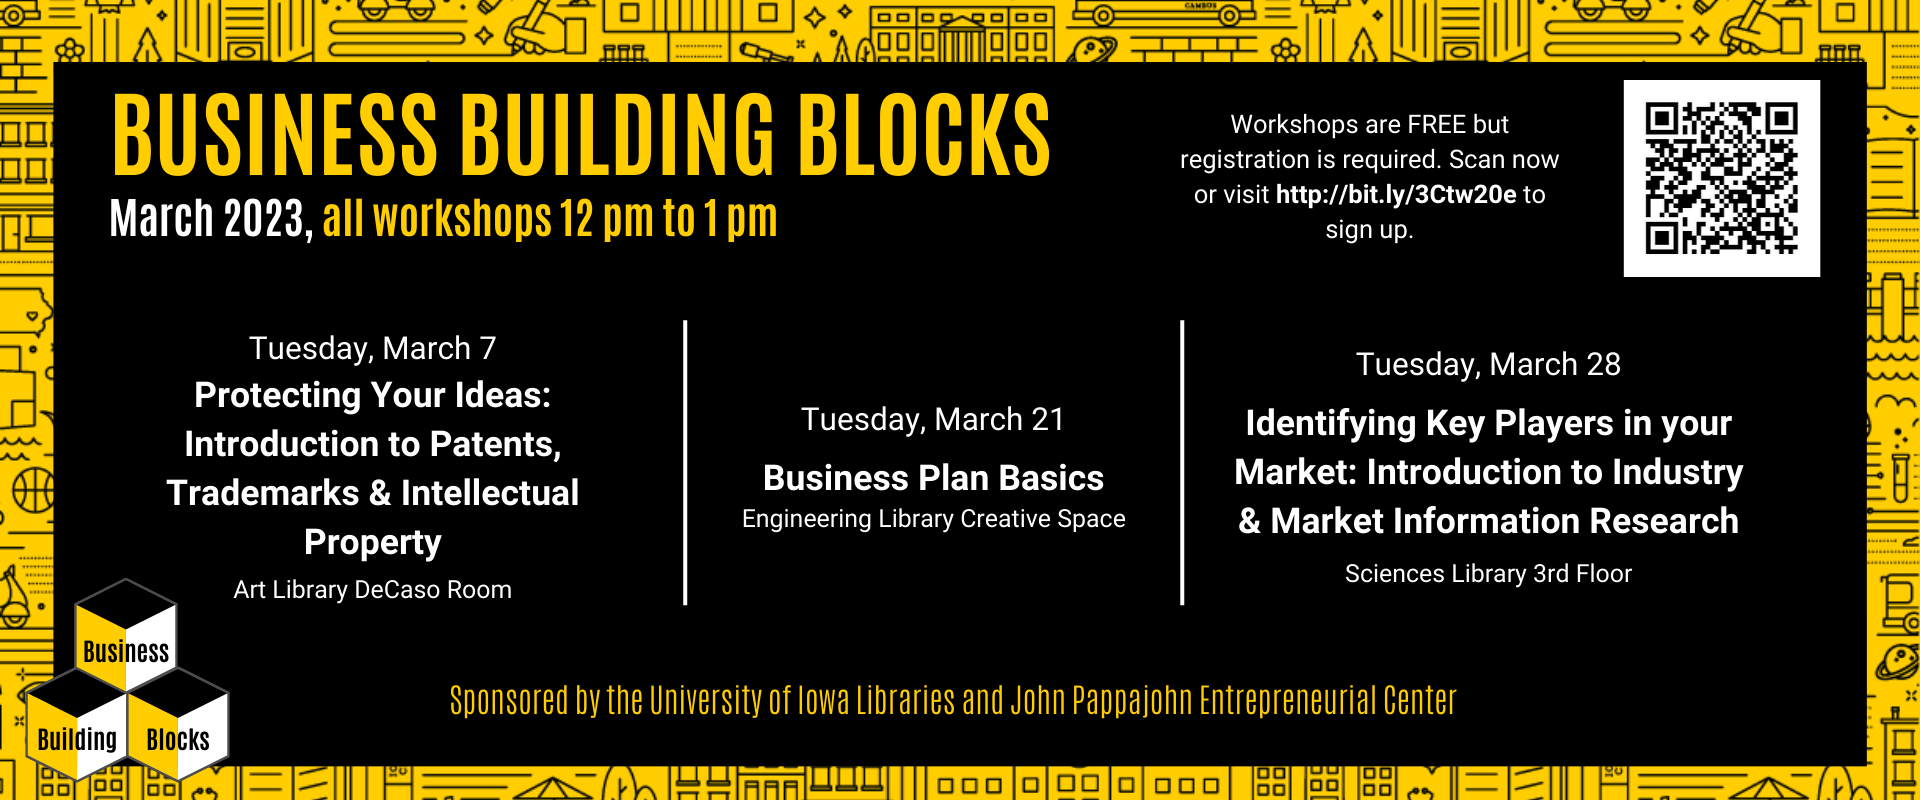 Business Building Blocks March 2023